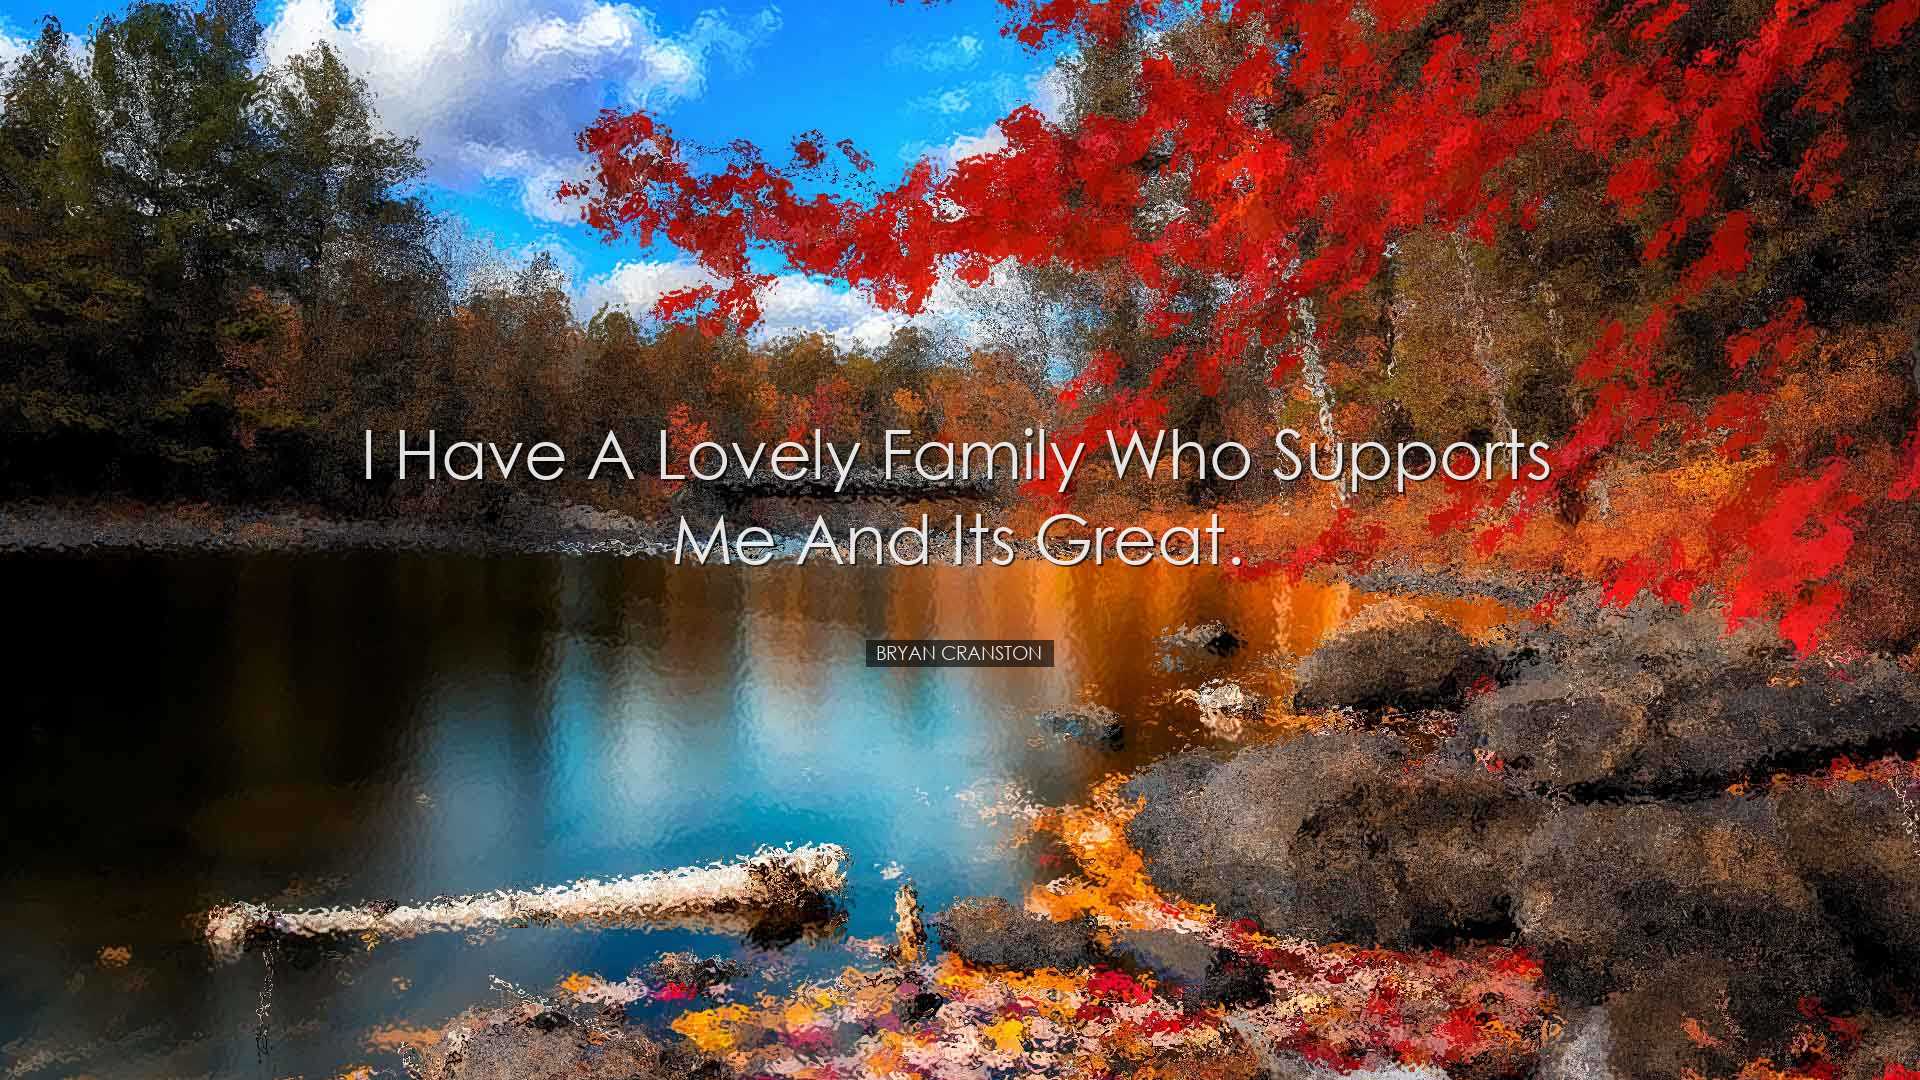 I have a lovely family who supports me and its great. - Bryan Cran